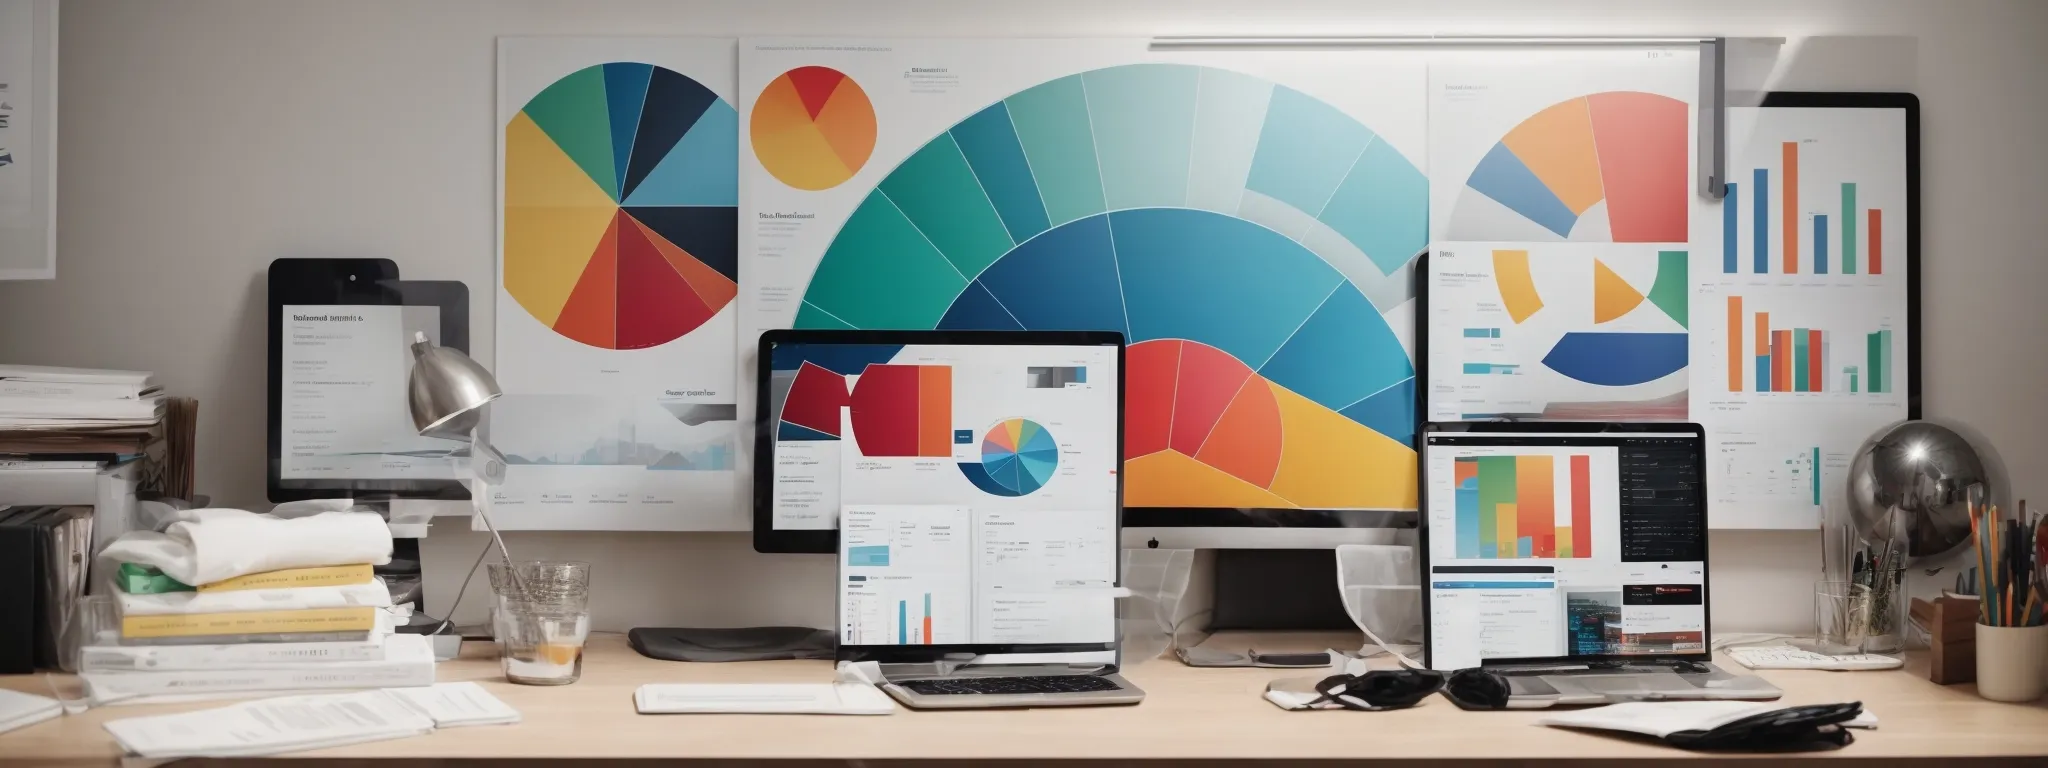 a clutter of stark, colorful pie charts and basic bar graphs looms over a minimalist desk, signaling the reductionist trend in depicting seo success.